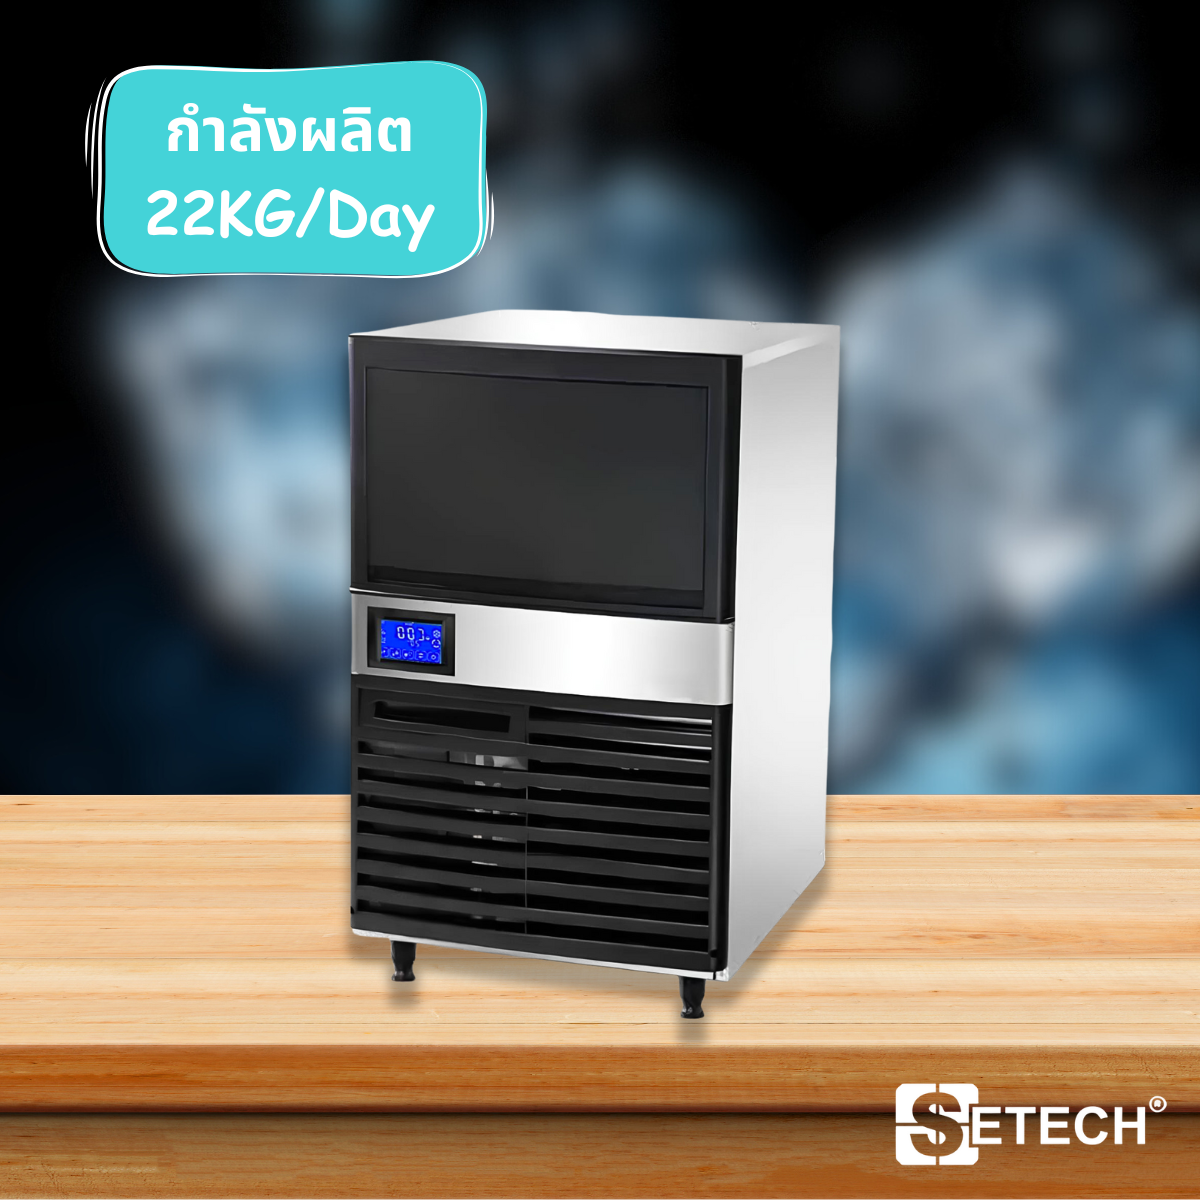 Ice maker 340w Setech production capacity 22KG per day